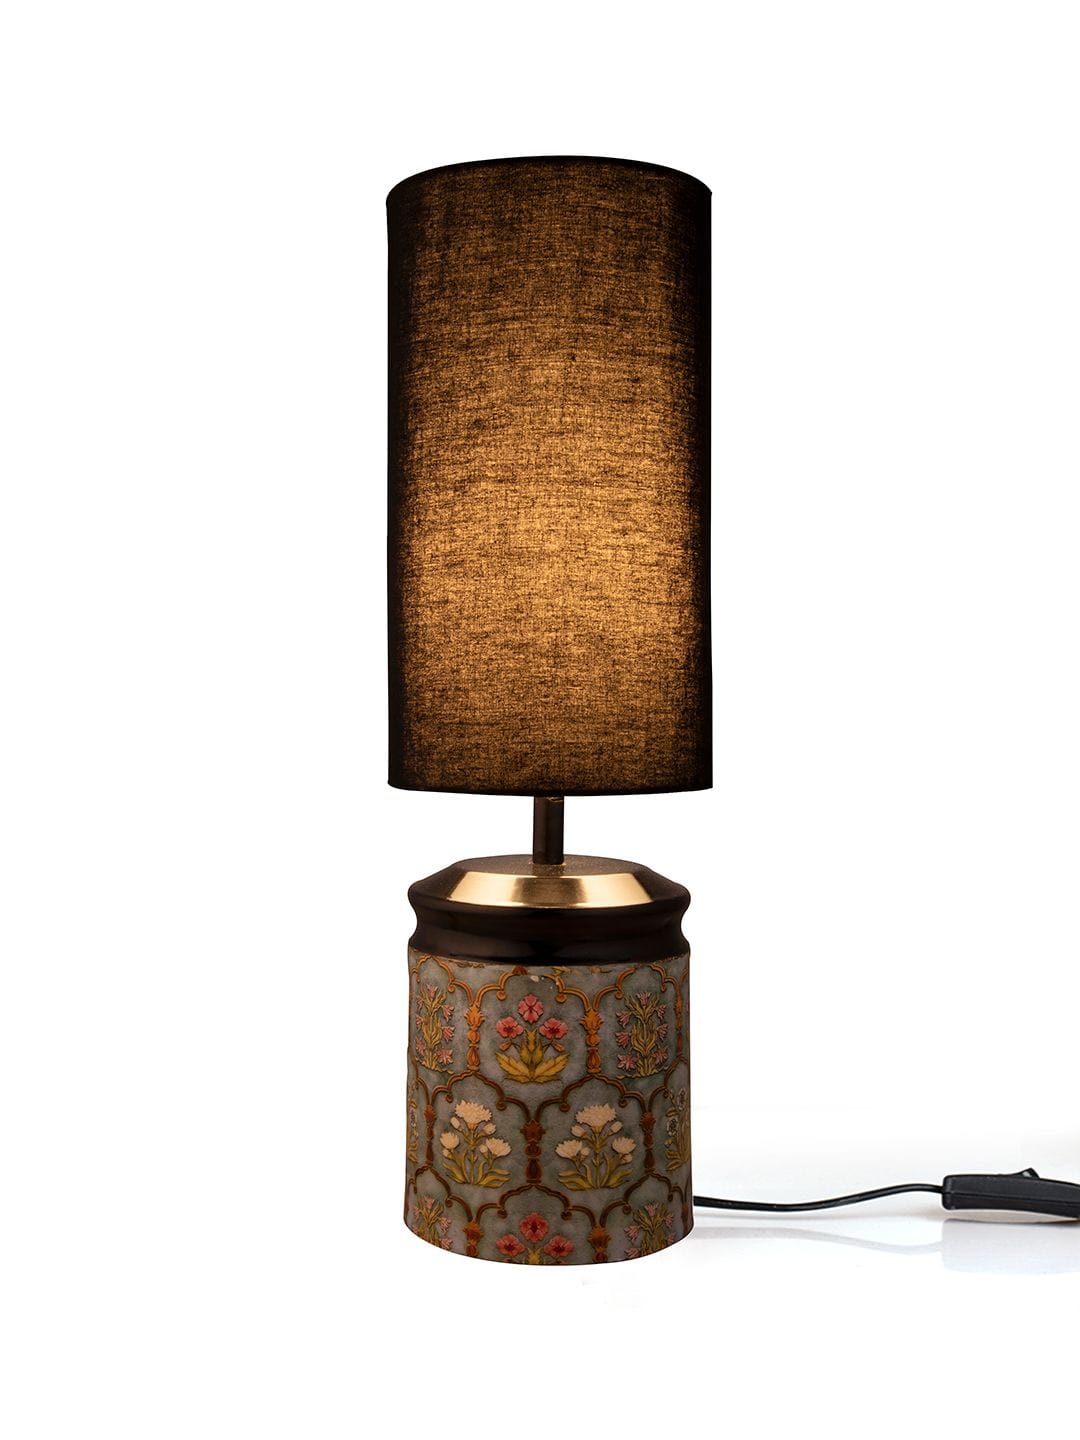 Metal Antique Motif printed Lamp with Solid Black Shade